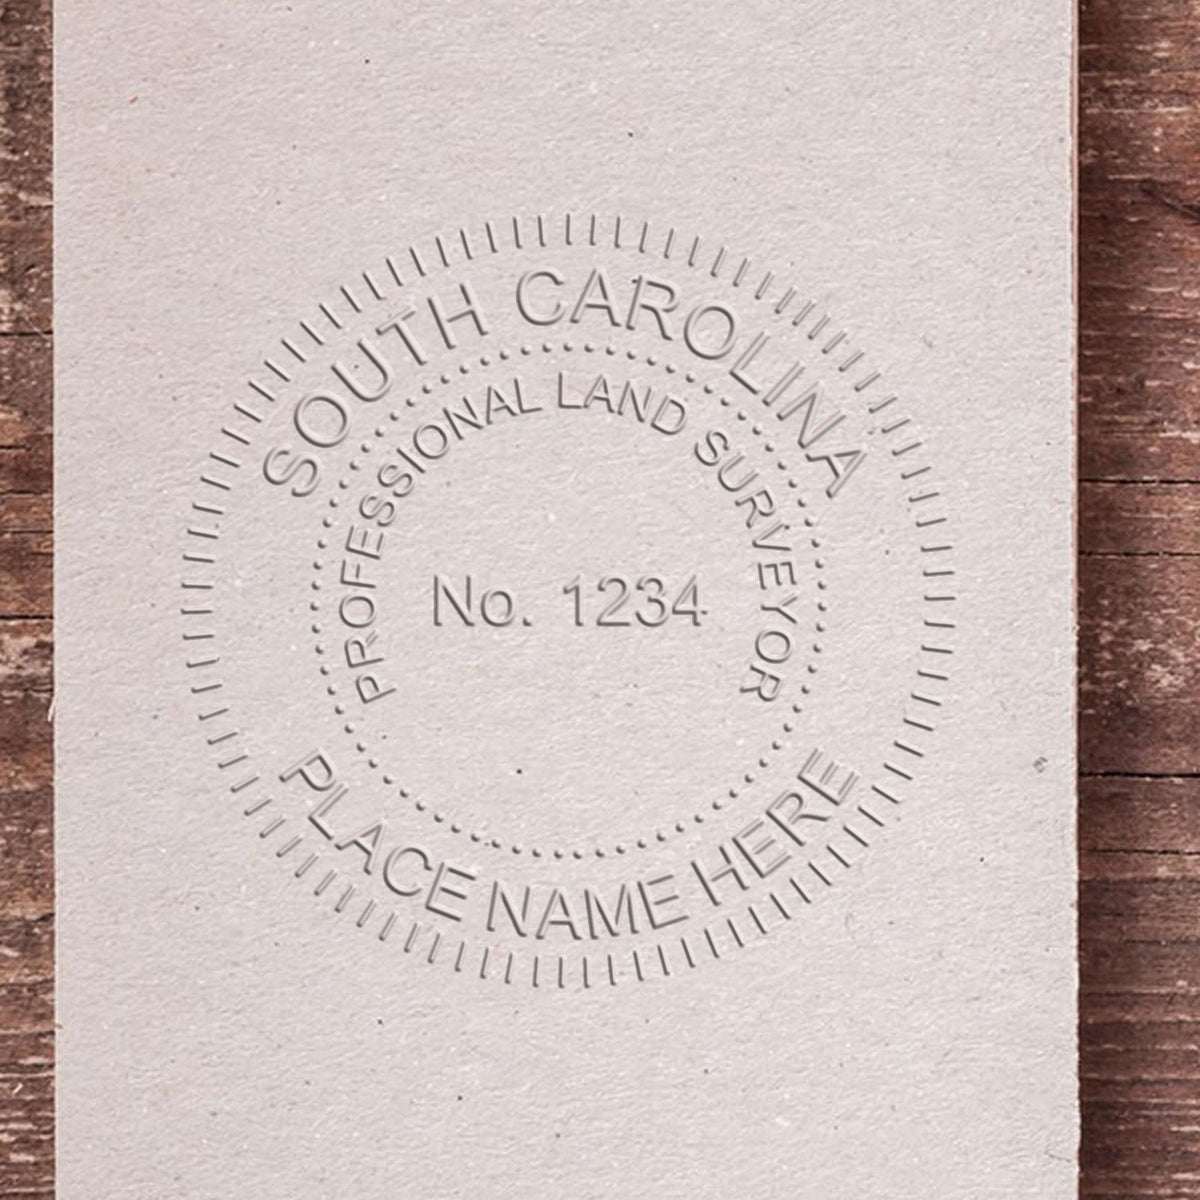 An in use photo of the Hybrid South Carolina Land Surveyor Seal showing a sample imprint on a cardstock